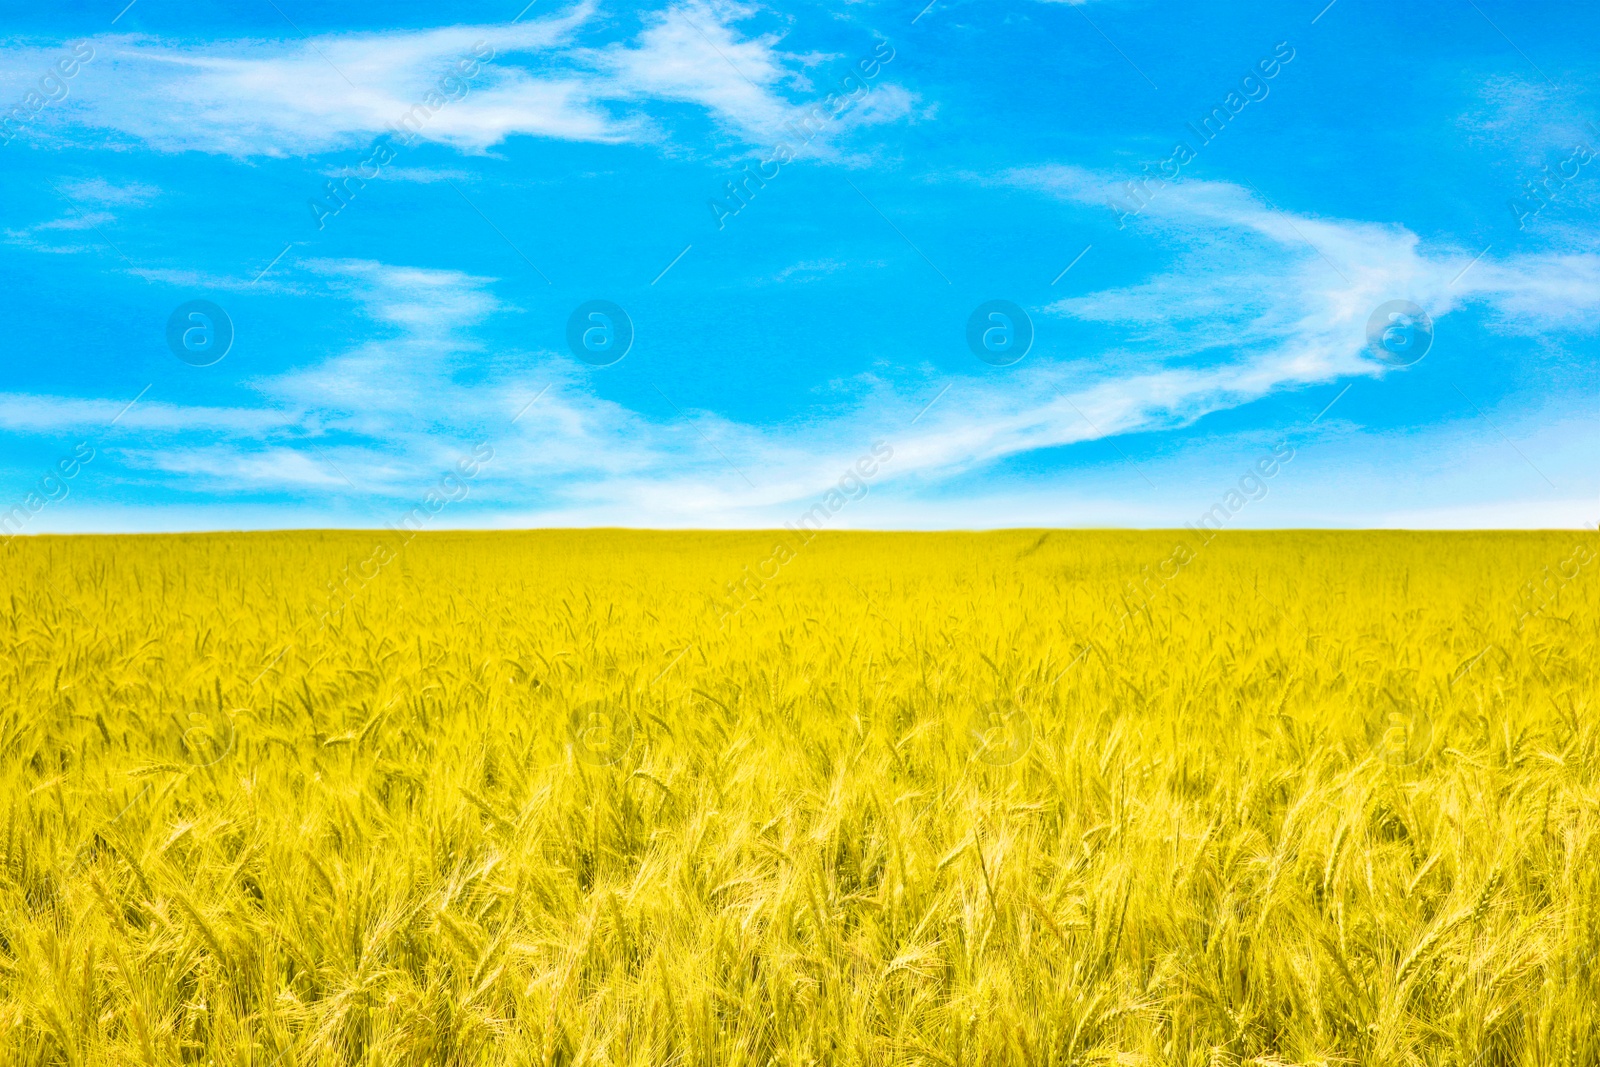 Image of Ukrainian flag. Picturesque view of yellow wheat field under blue sky